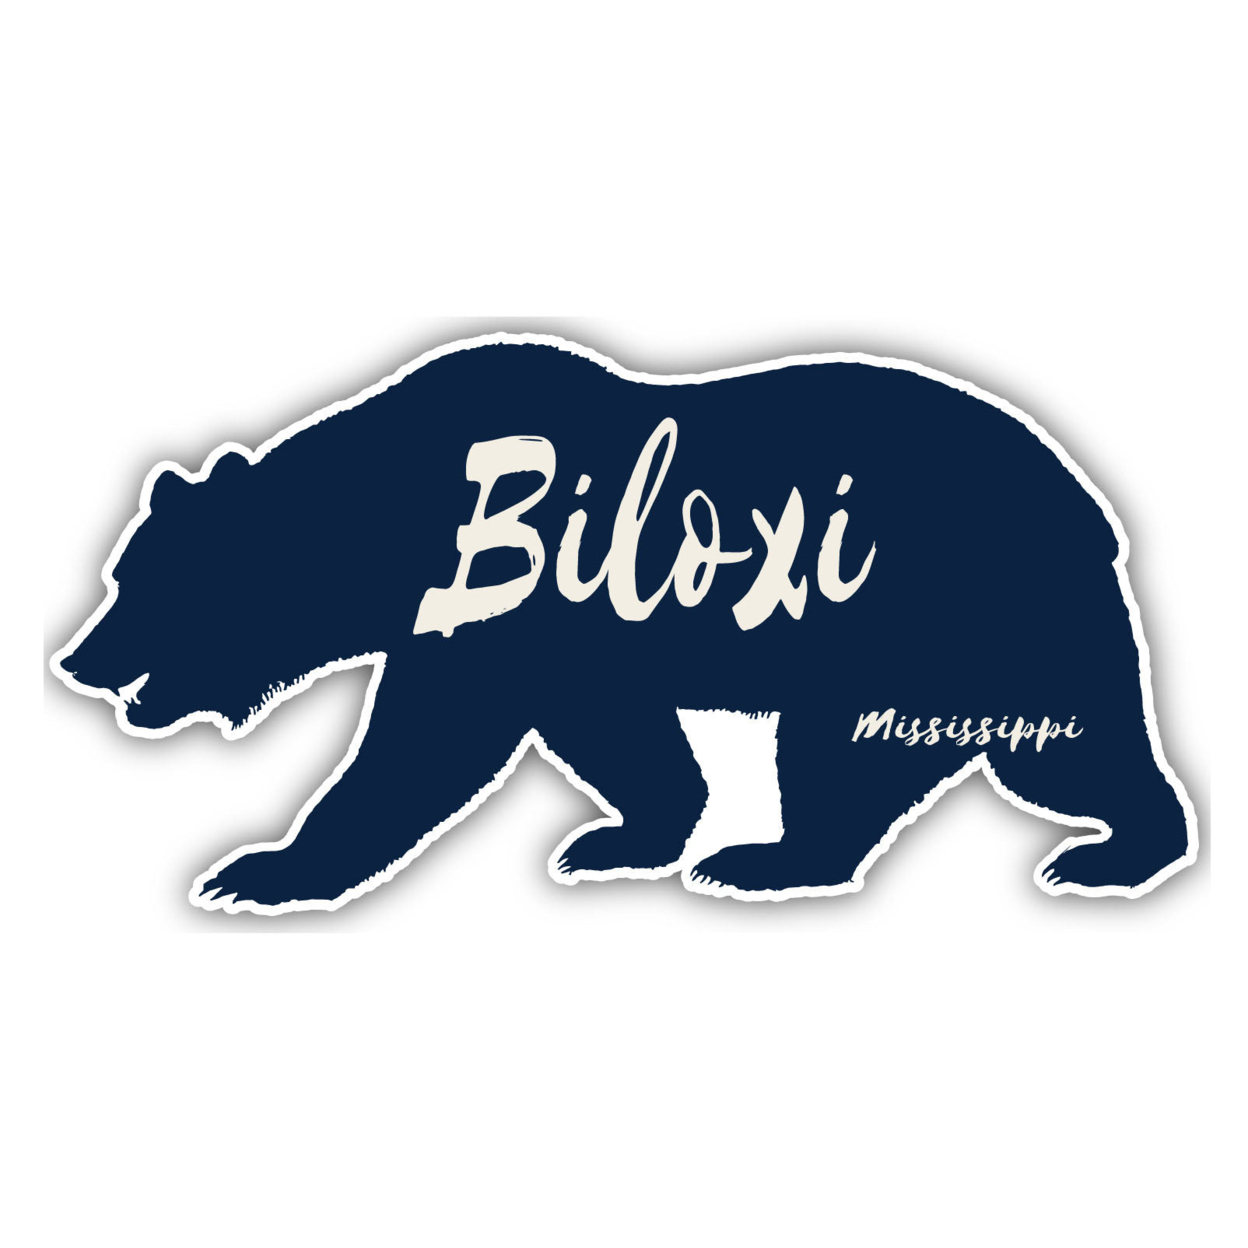 Biloxi Mississippi Souvenir Decorative Stickers (Choose Theme And Size) - 4-Pack, 6-Inch, Camp Life